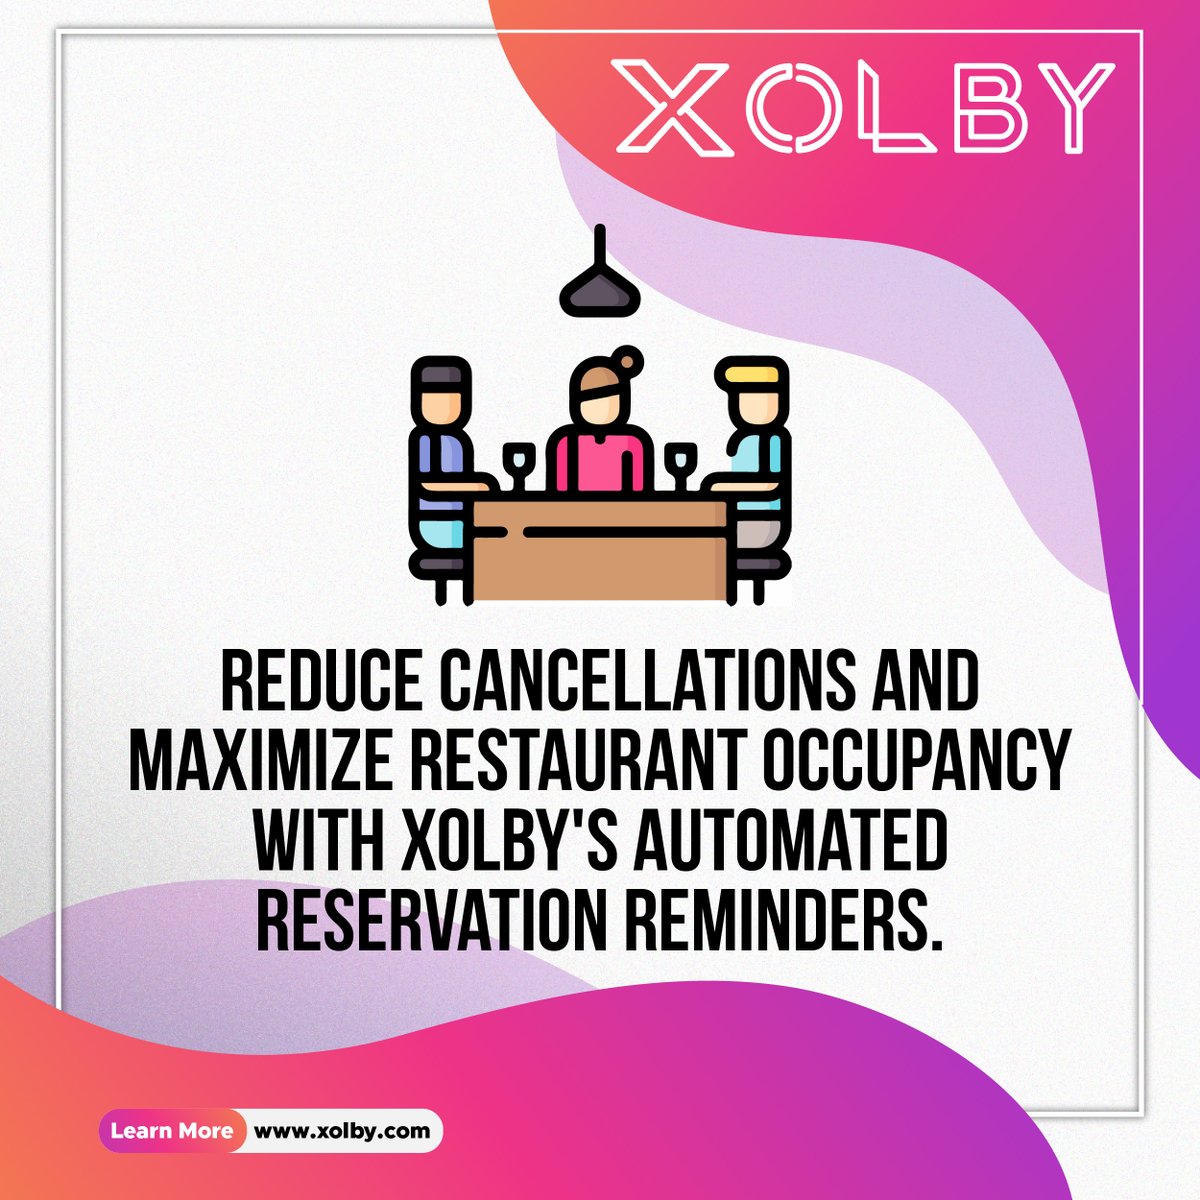 Reduce cancellations and maximize restaurant occupancy with XOLBY's automated reservation reminders. It's the key to keeping your tables full and your customers happy. #ReservationReminders #XOLBY  #professionaldevelopment #startupindia #careercoach #businessconsultant